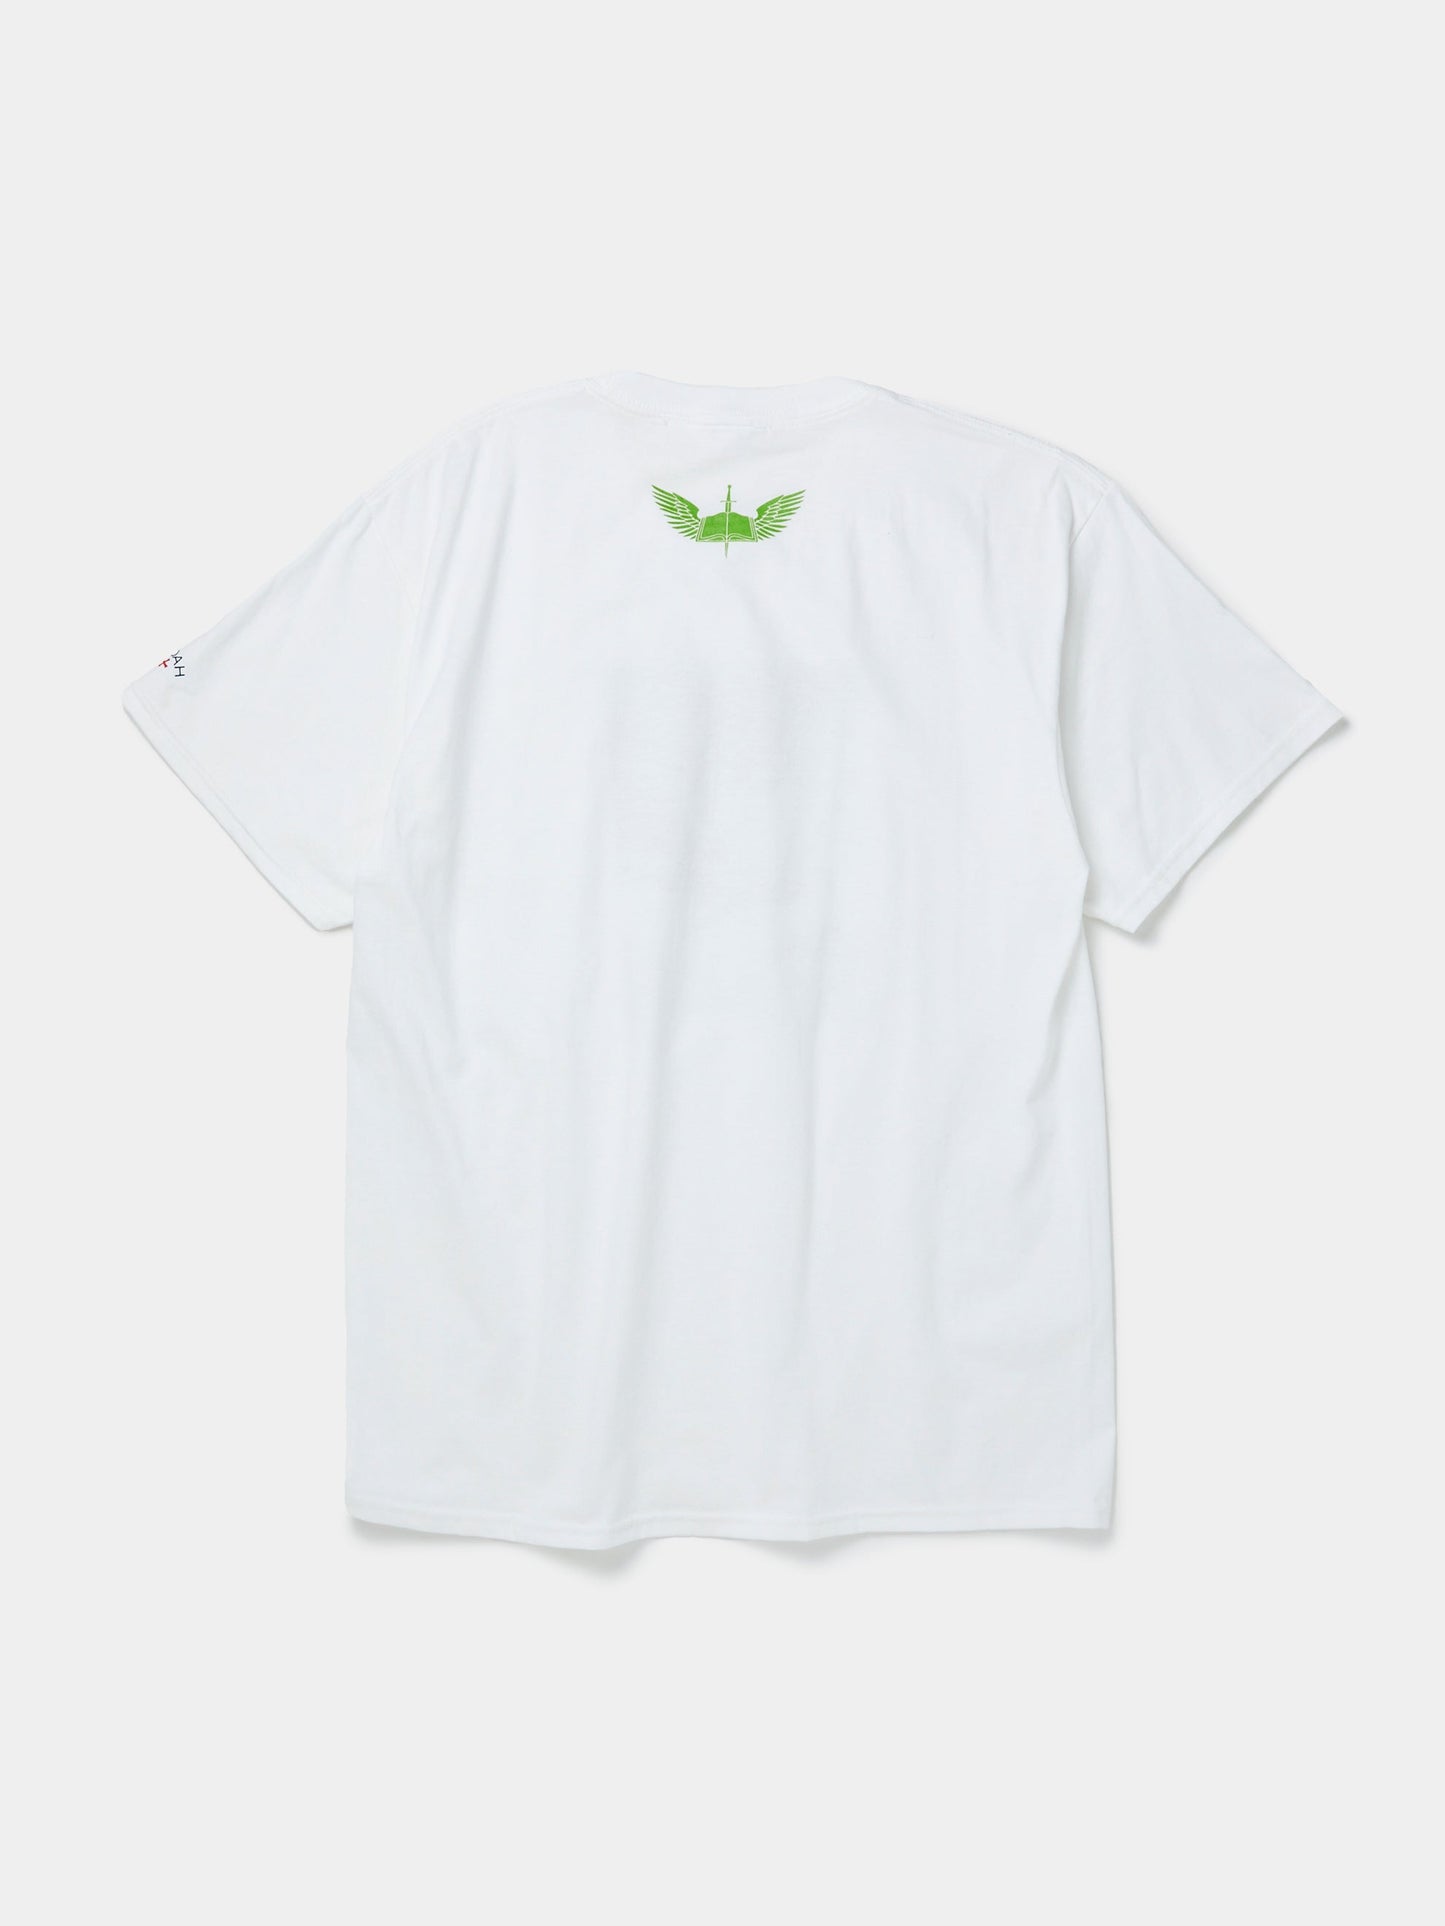 Get Back Up Tee (White)